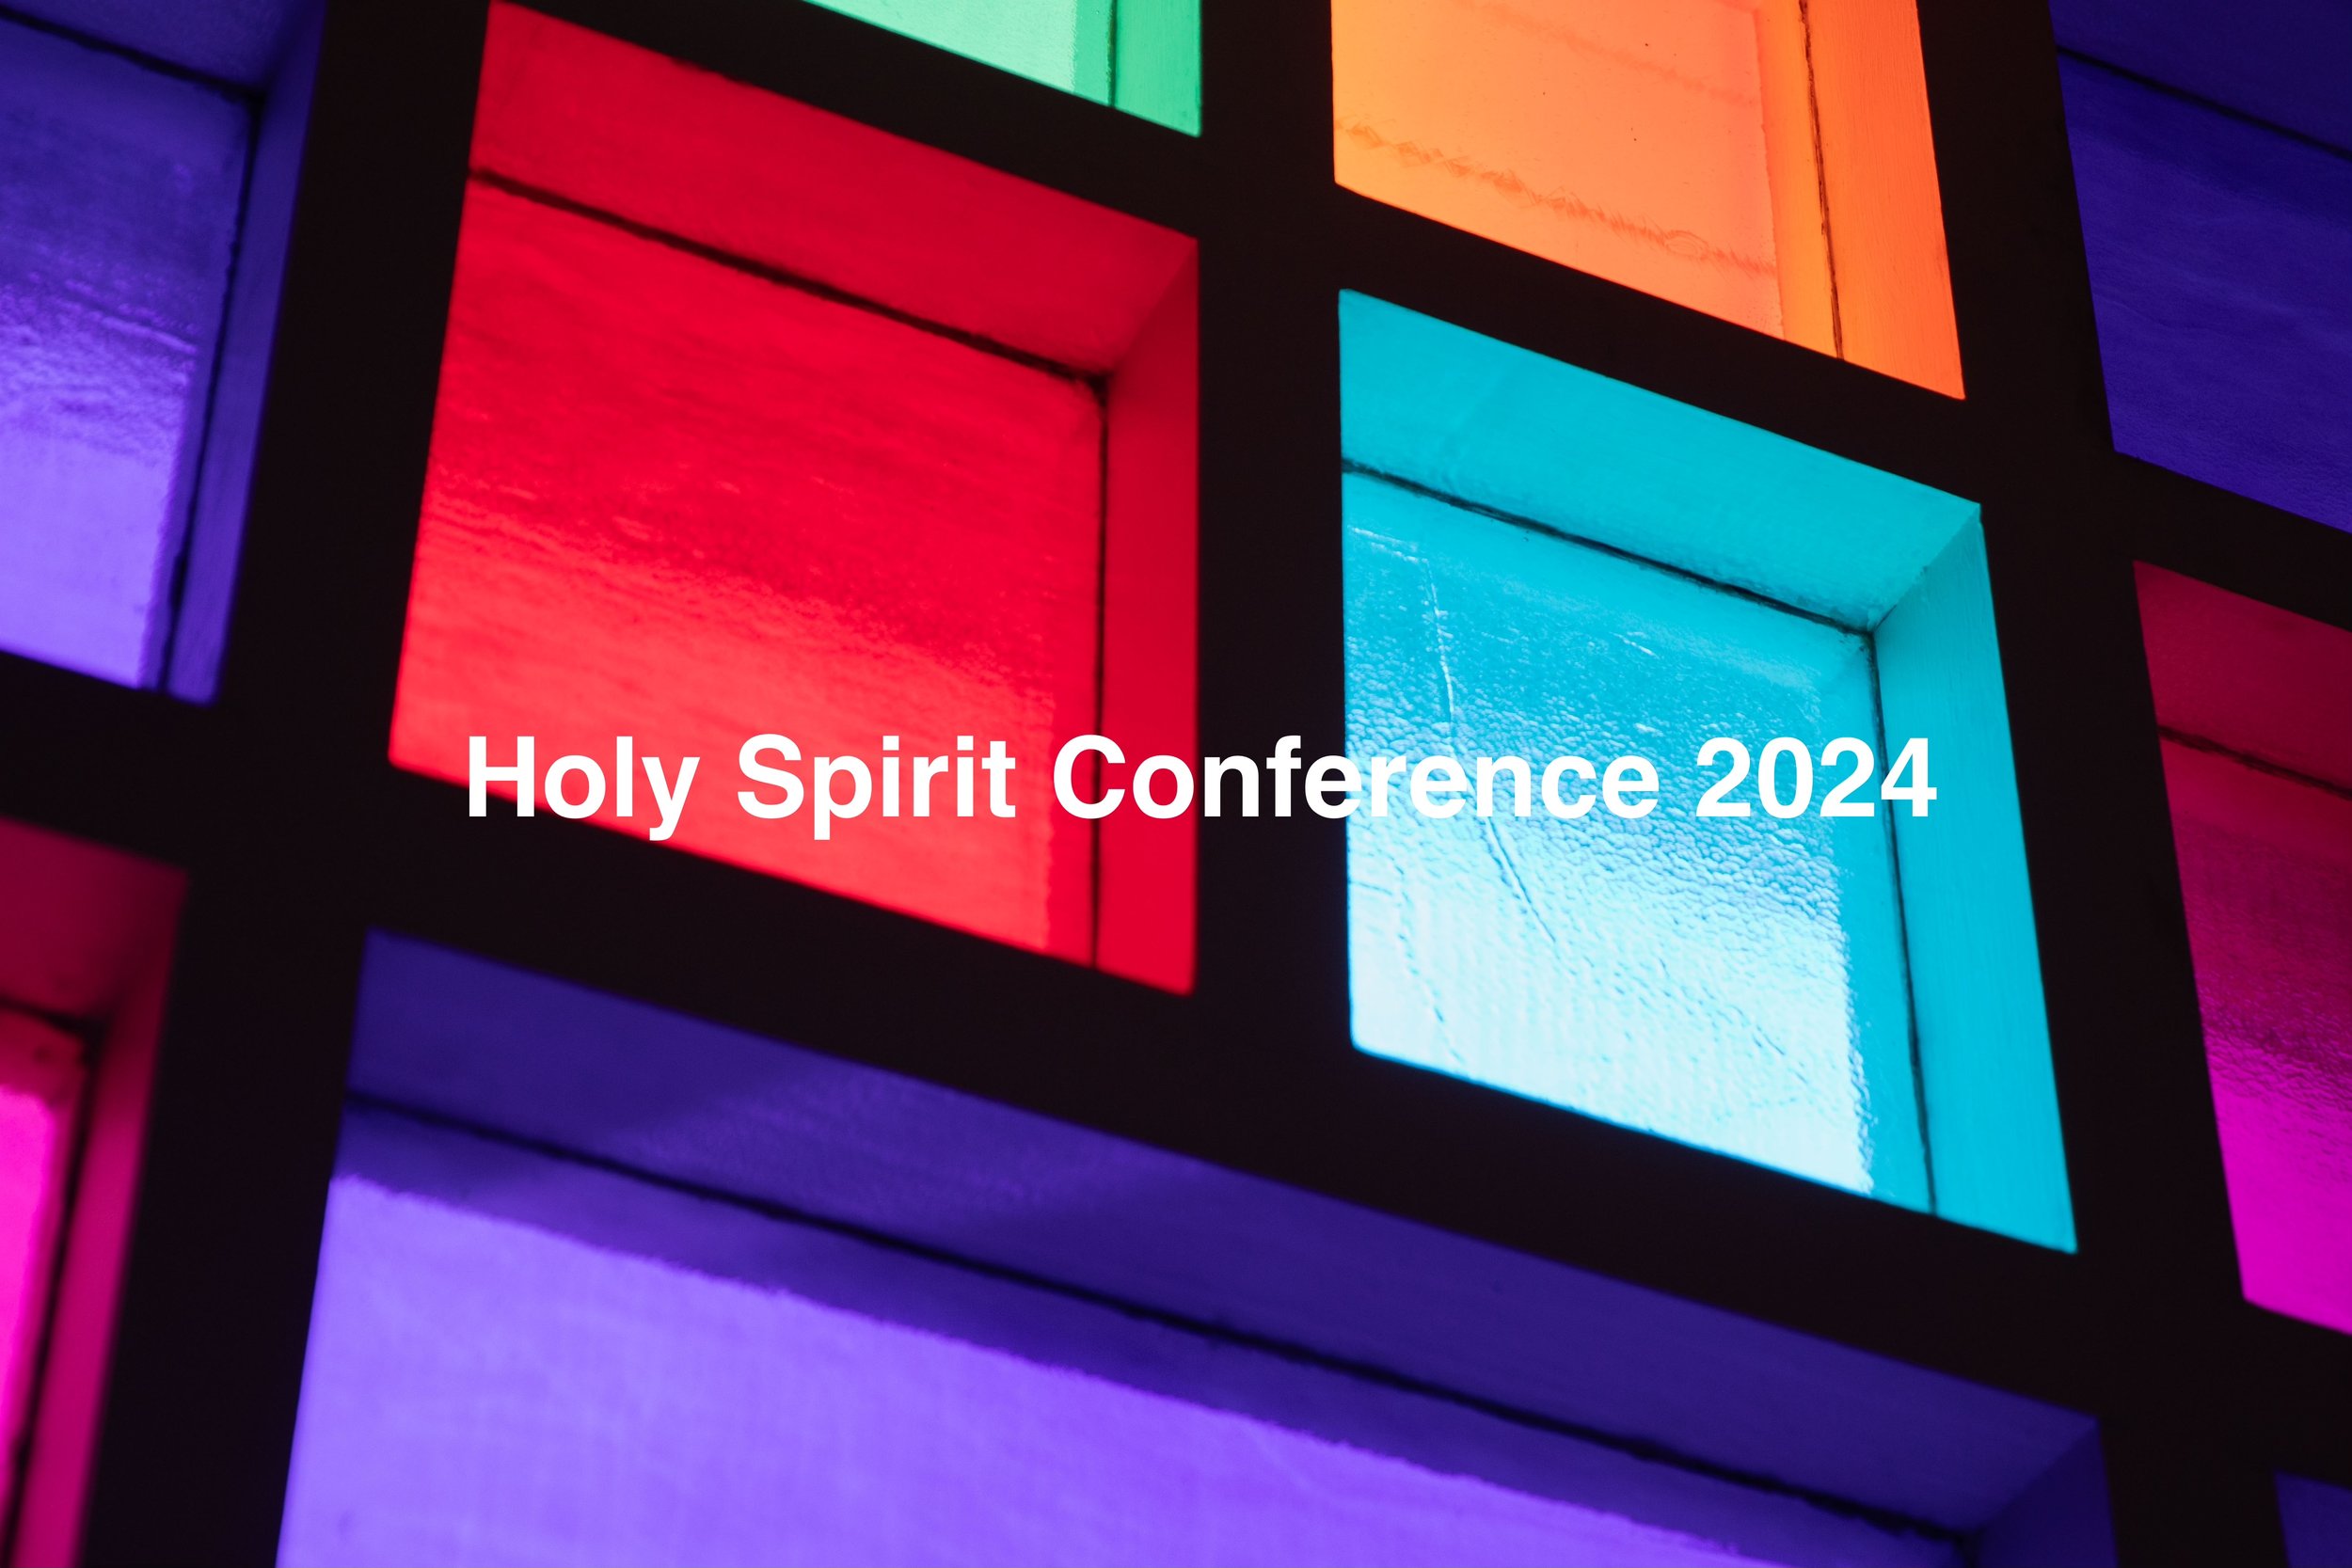 Holy Spirit Conference 2024